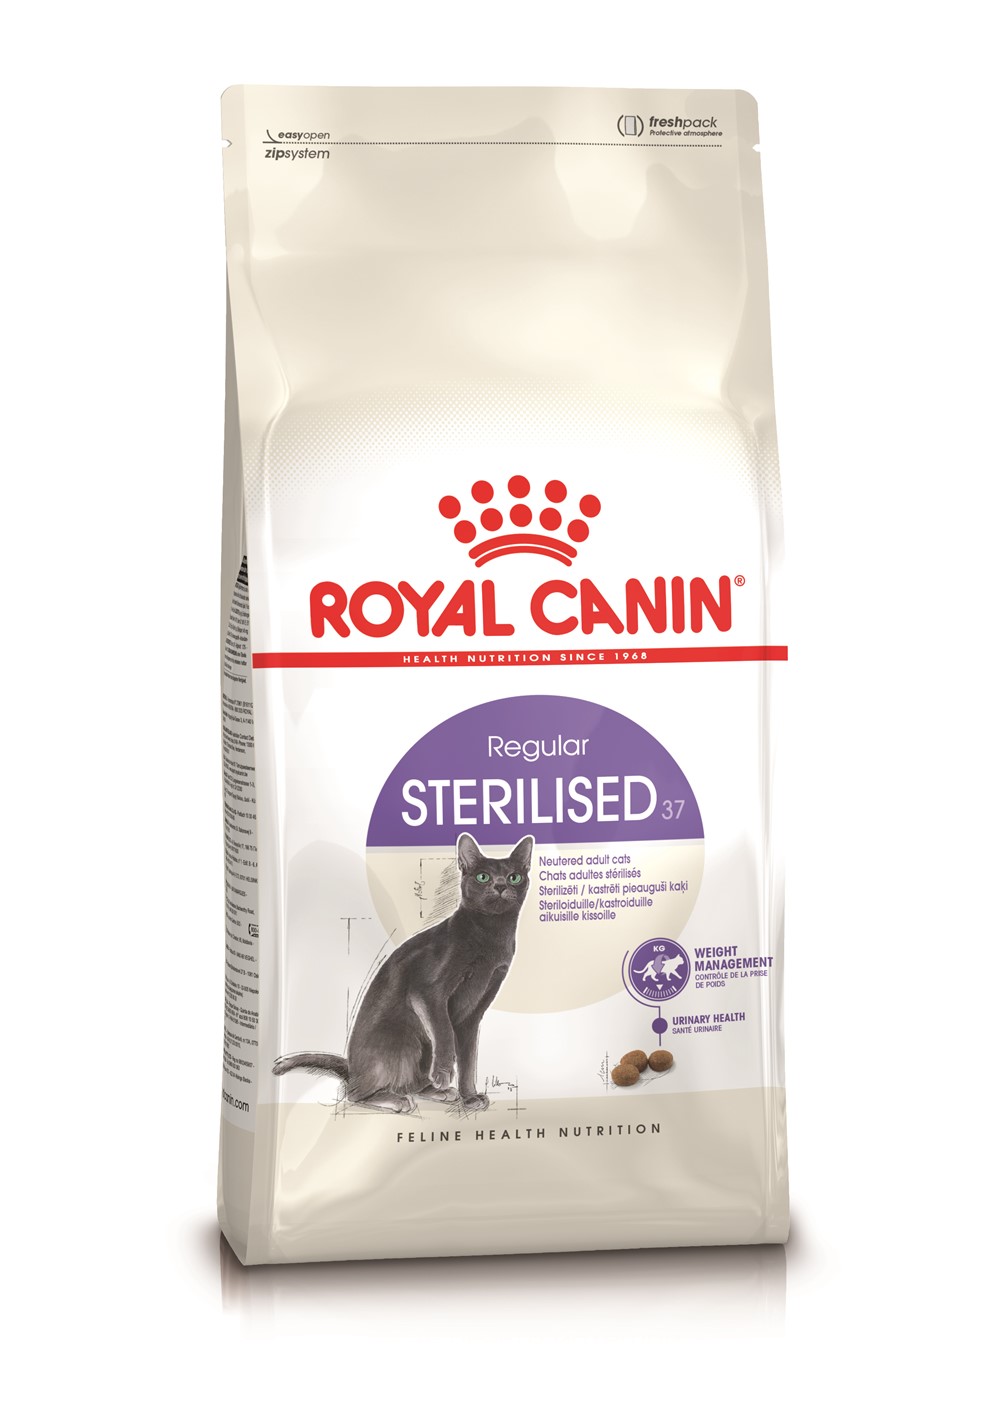 Croquette chat sterilised37 4kg - ROYAL CANIN 